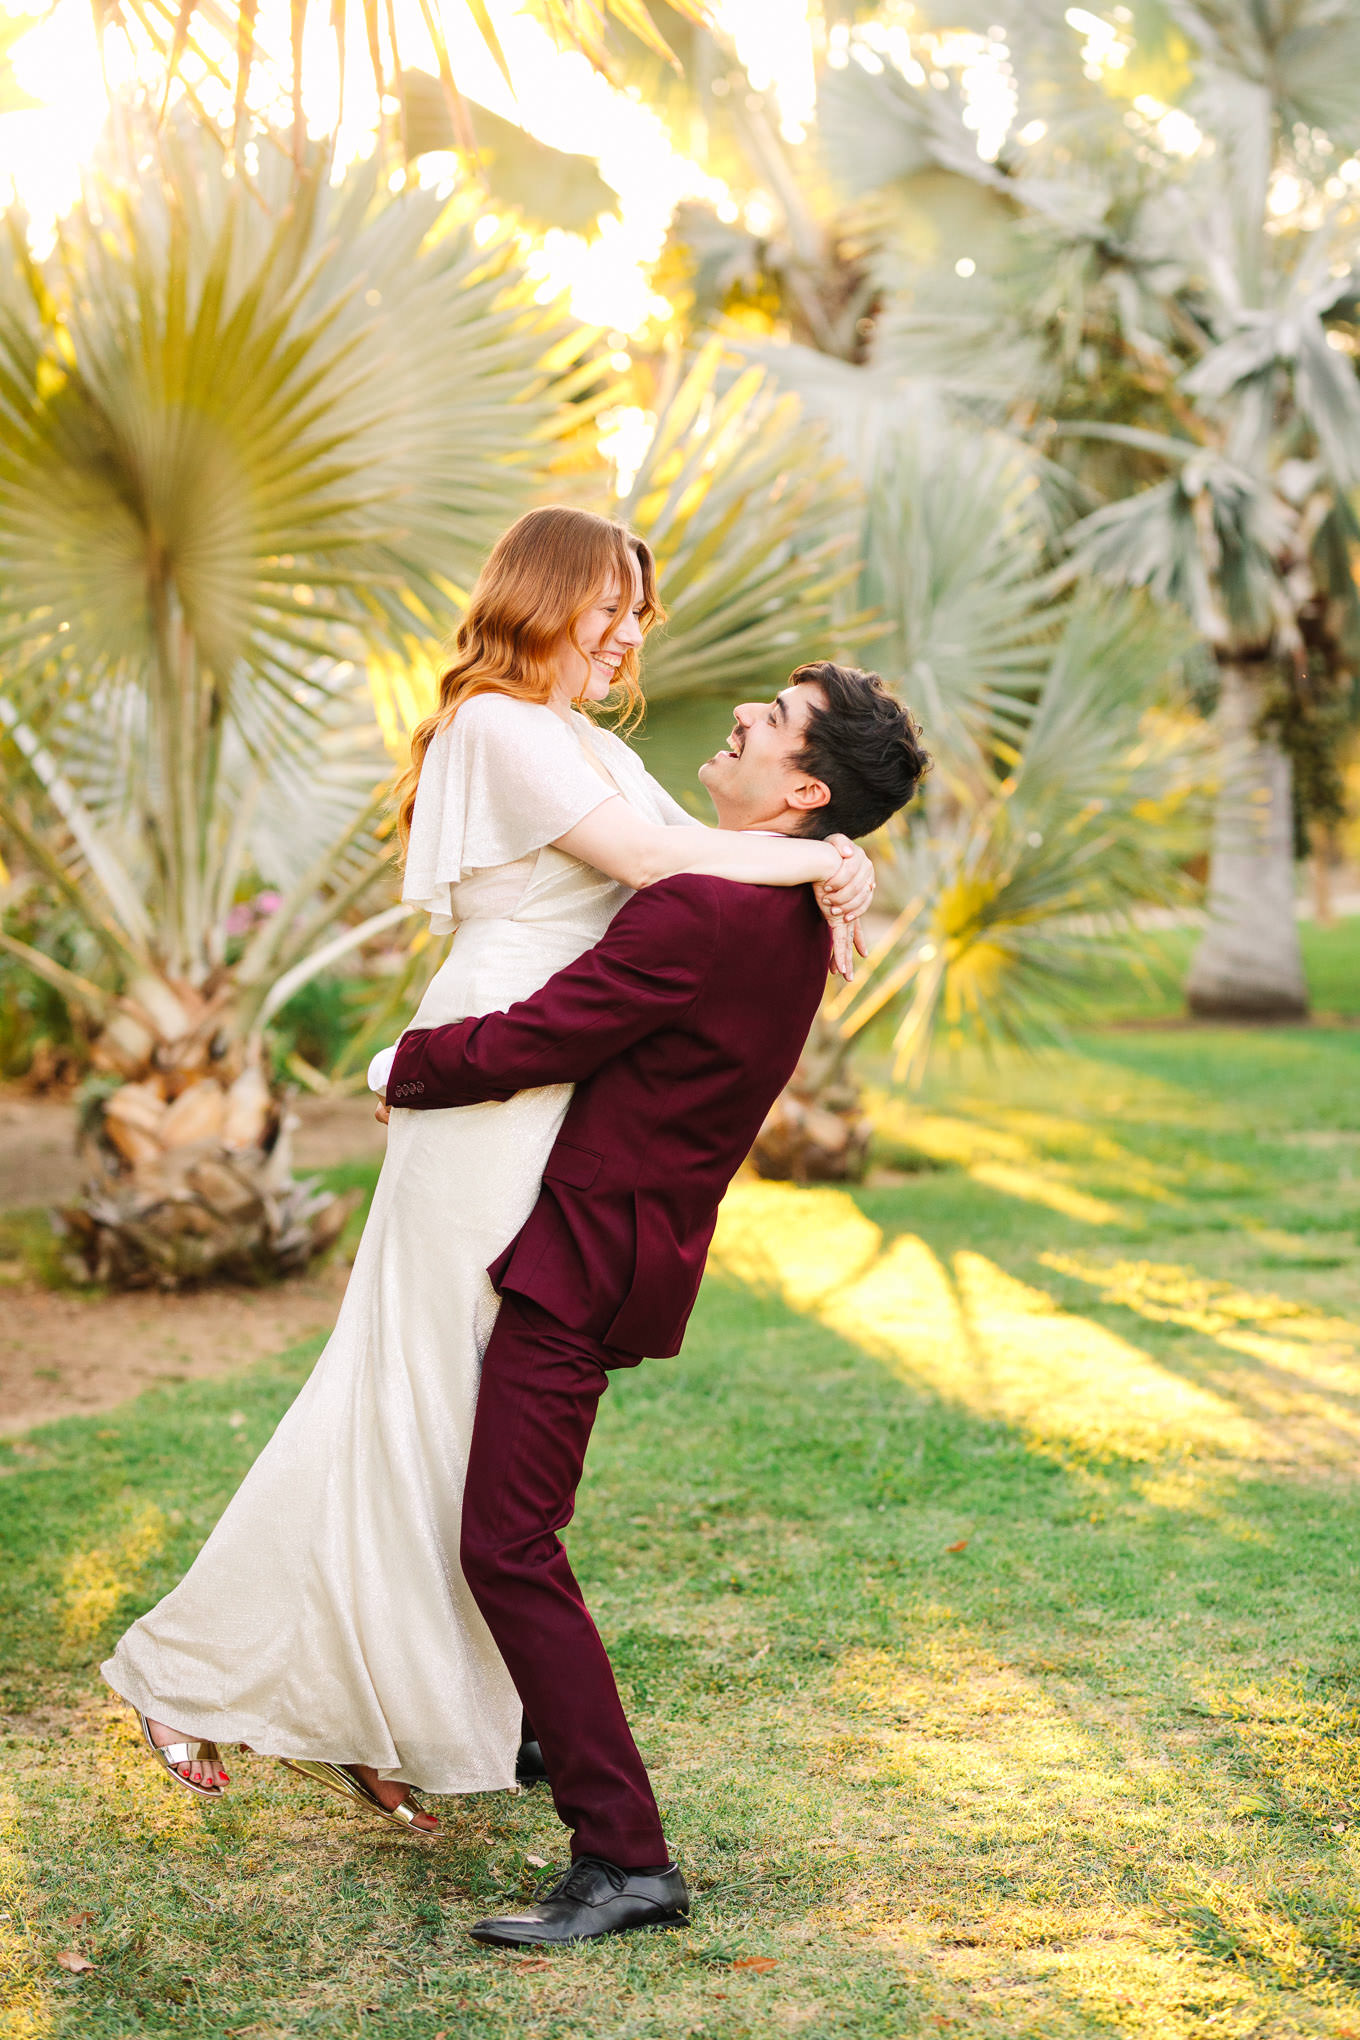 Groom lifting bride in palm garden | Los Angeles Arboretum Elopement | Colorful and elevated wedding photography for fun-loving couples in Southern California | #LosAngelesElopement #elopement #LAarboretum #LAskyline #elopementphotos   Source: Mary Costa Photography | Los Angeles